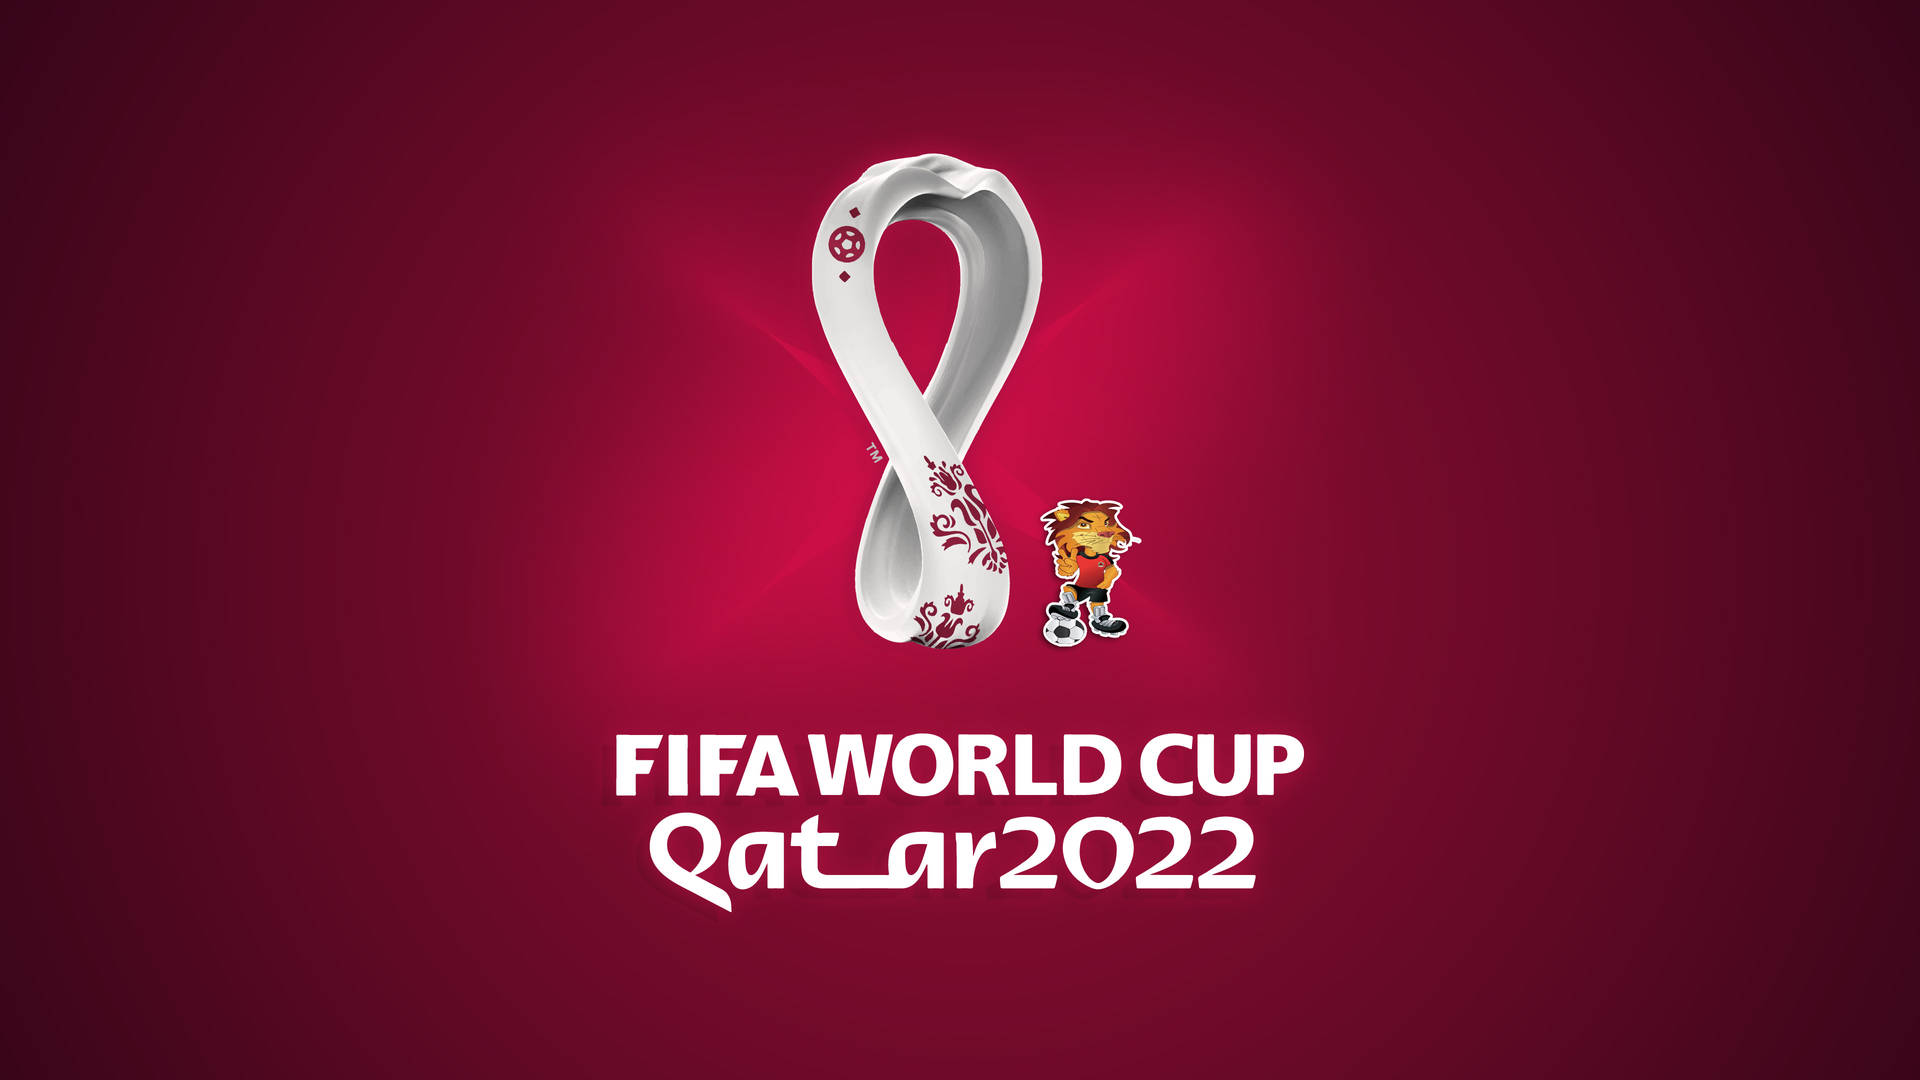 Get Ready For The 2022 Fifa World Cup! Background